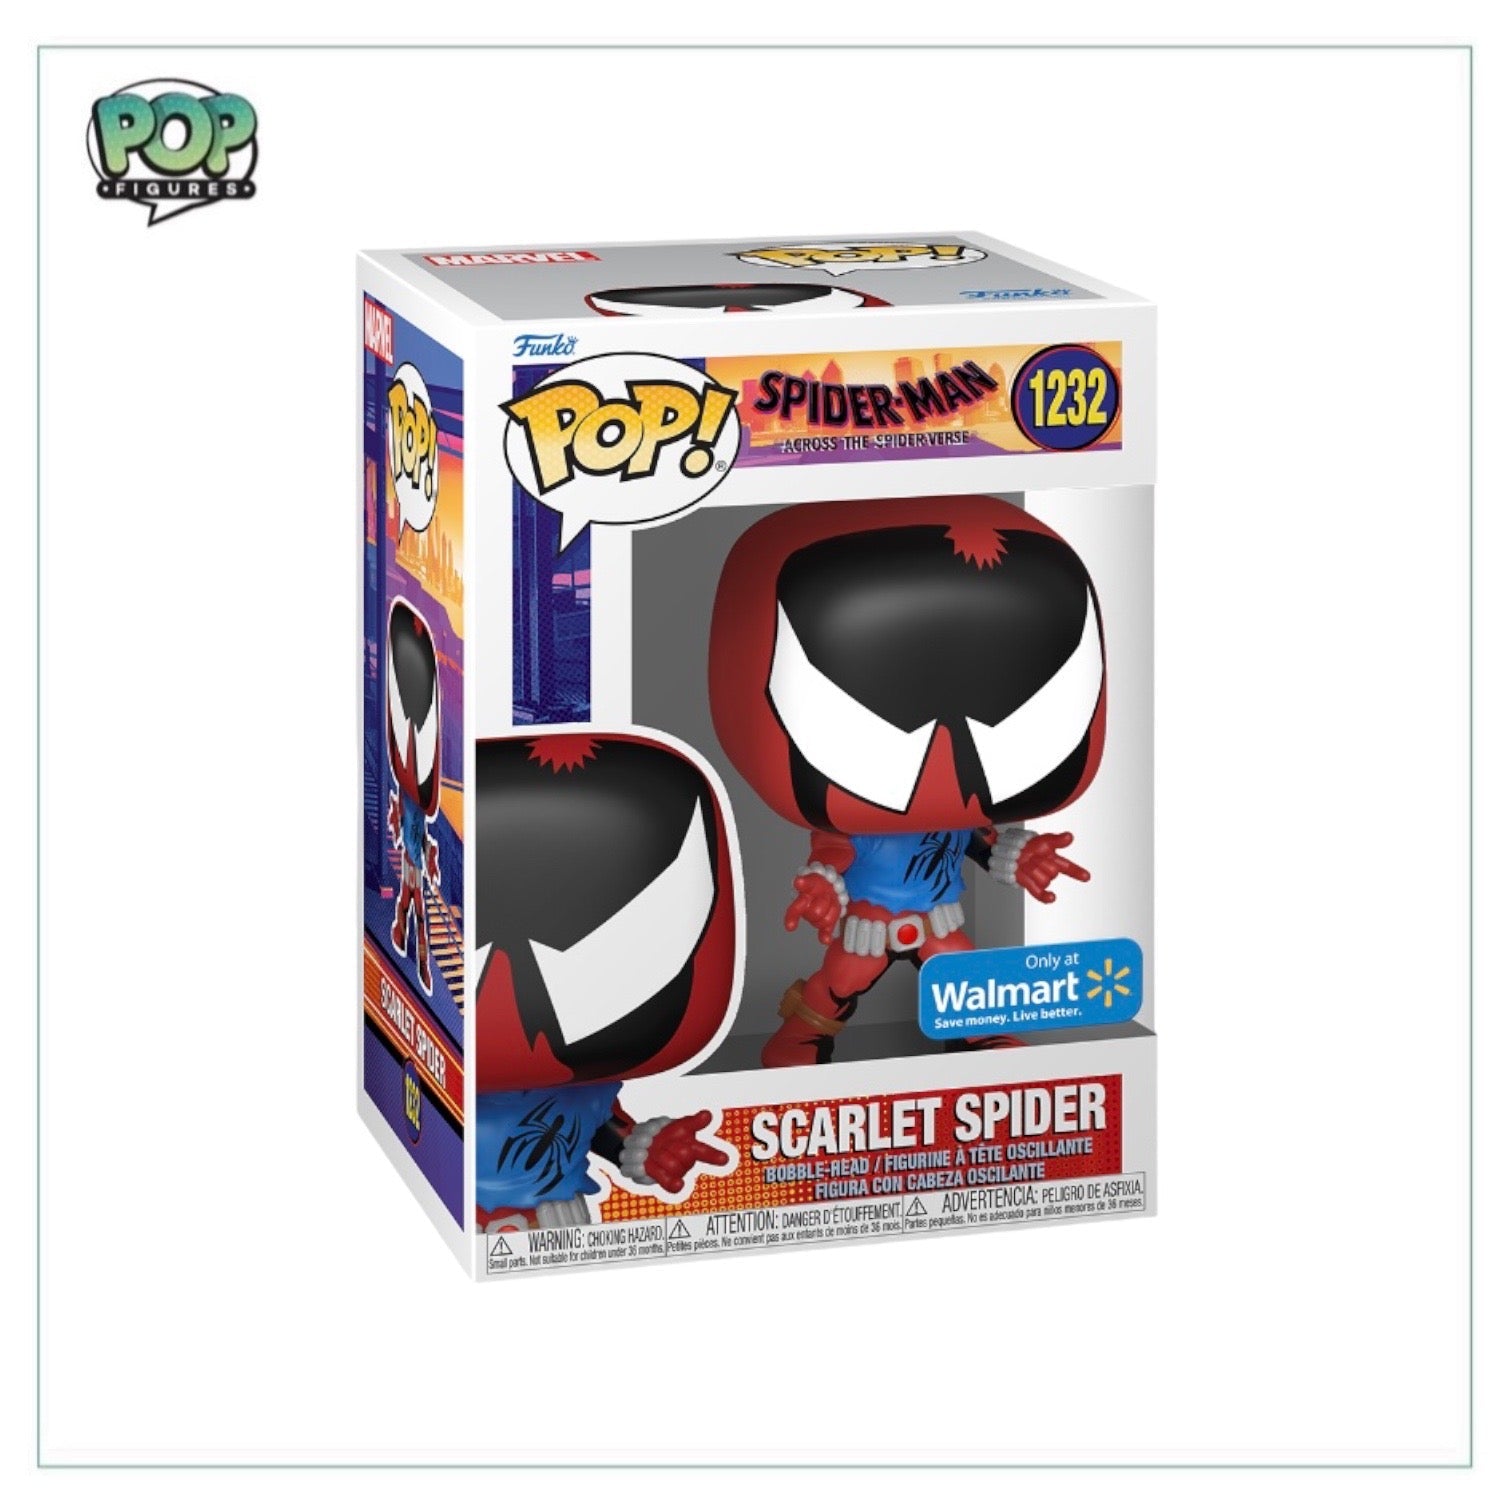 Scarlet Spider #1232 Funko Pop! - Spider-Man Across The Spider-Verse - Walmart Exclusive - Angry Cat